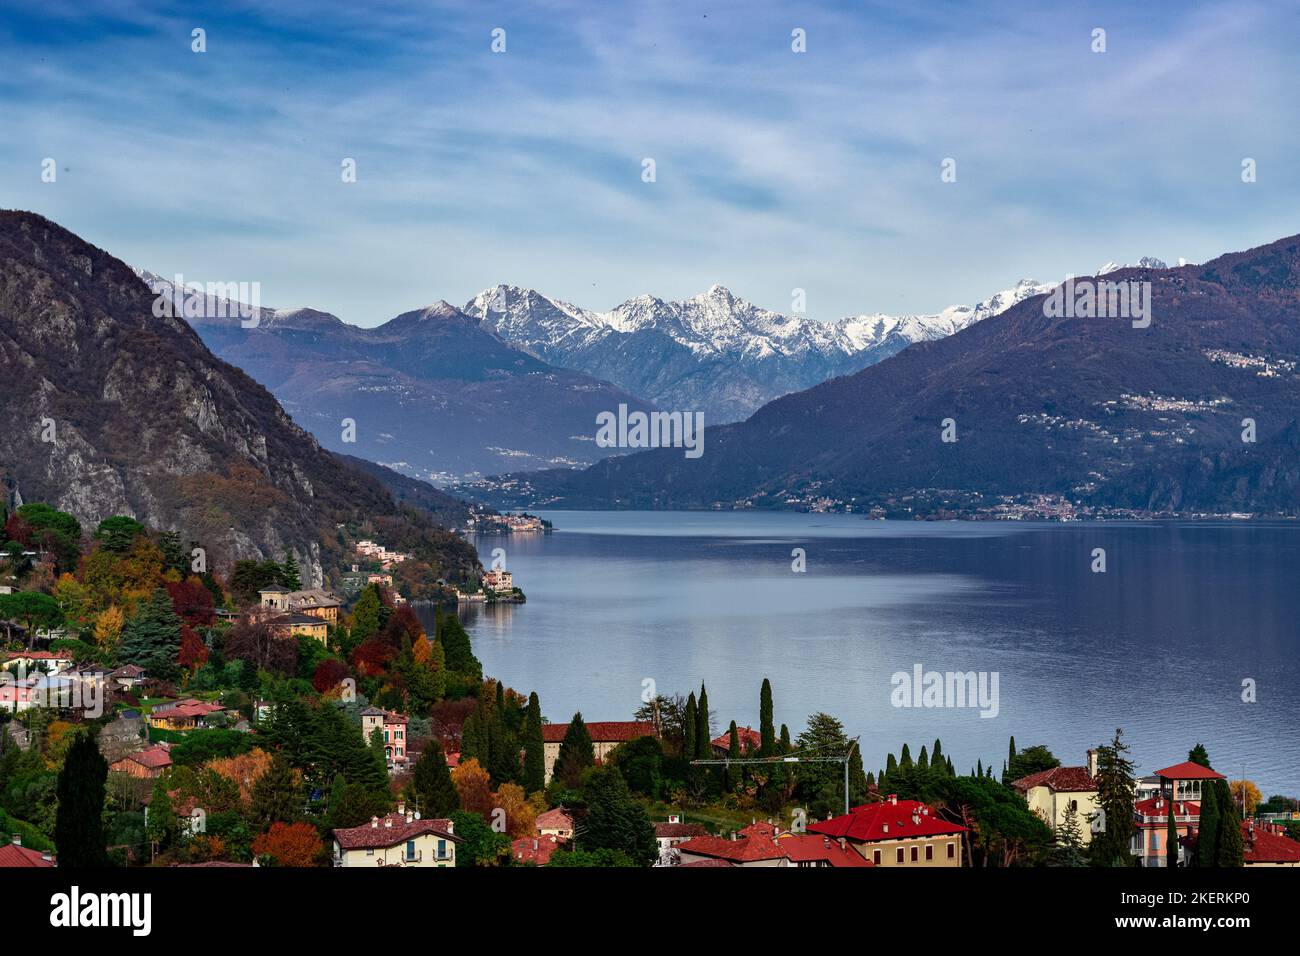 A beautiful scene of Lake Como with the Alps and colorful trees in the distance. Stock Photo